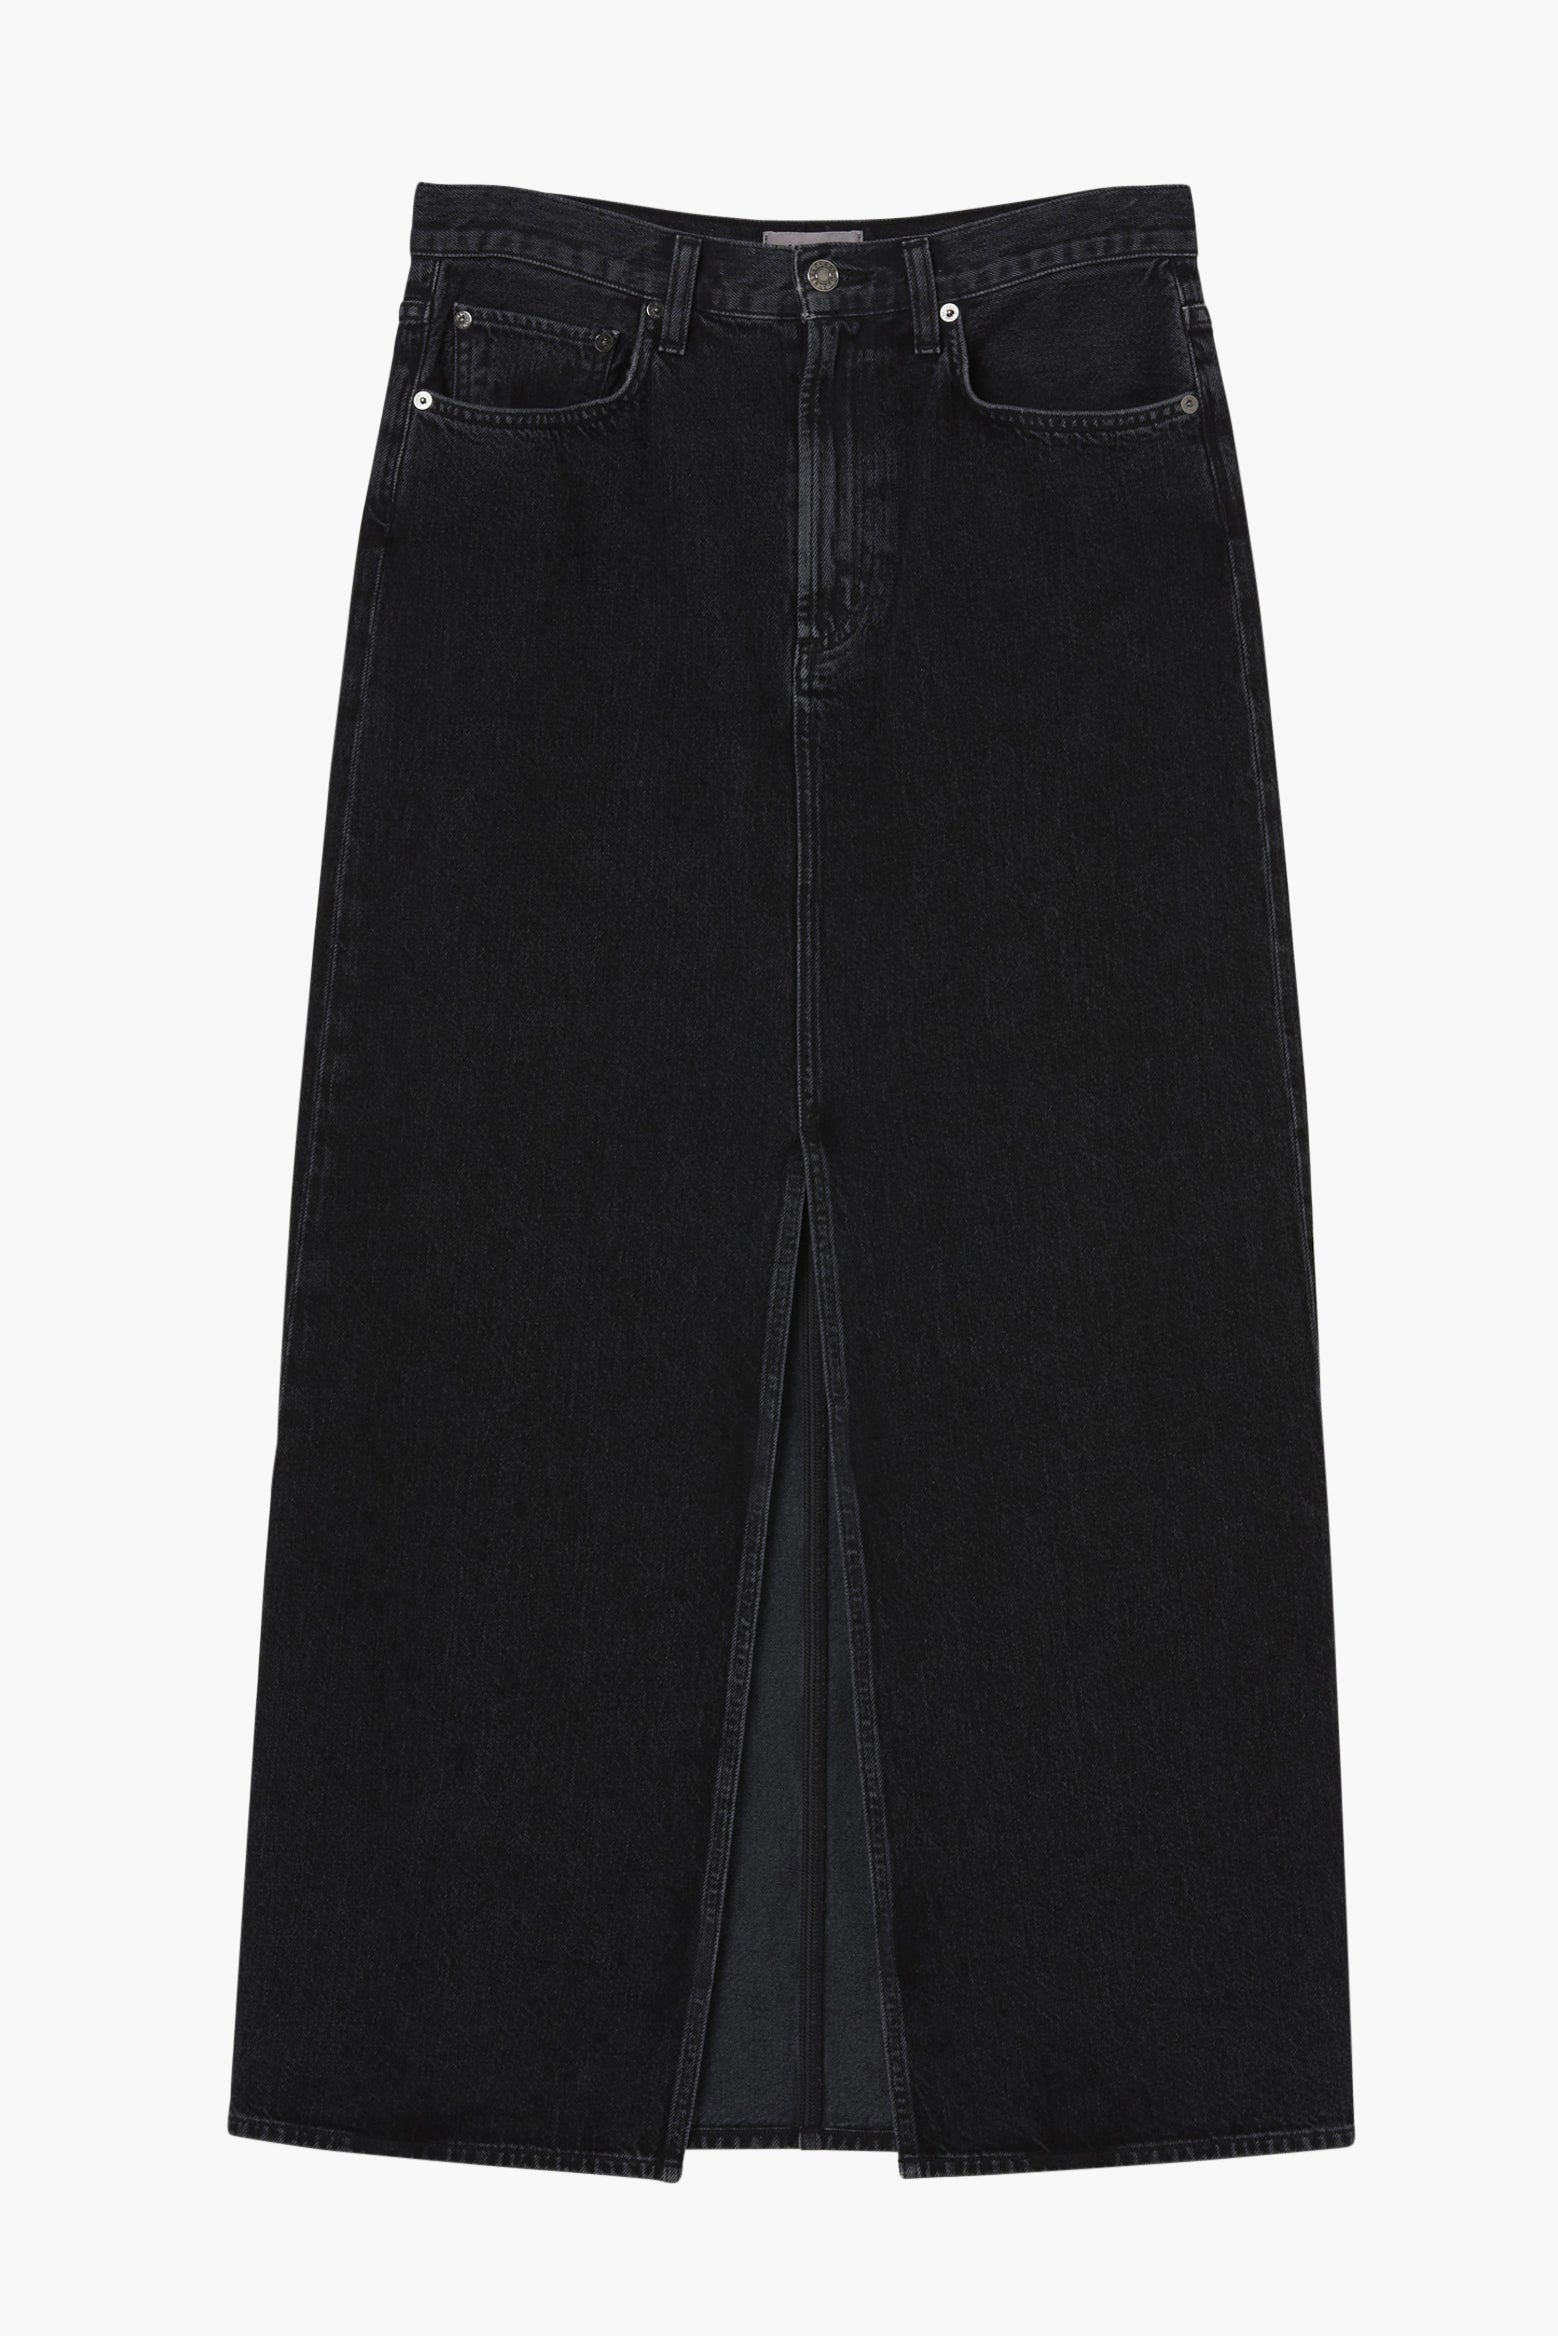 Agolde Leif Skirt in Spider available at TNT The New Trend Australia